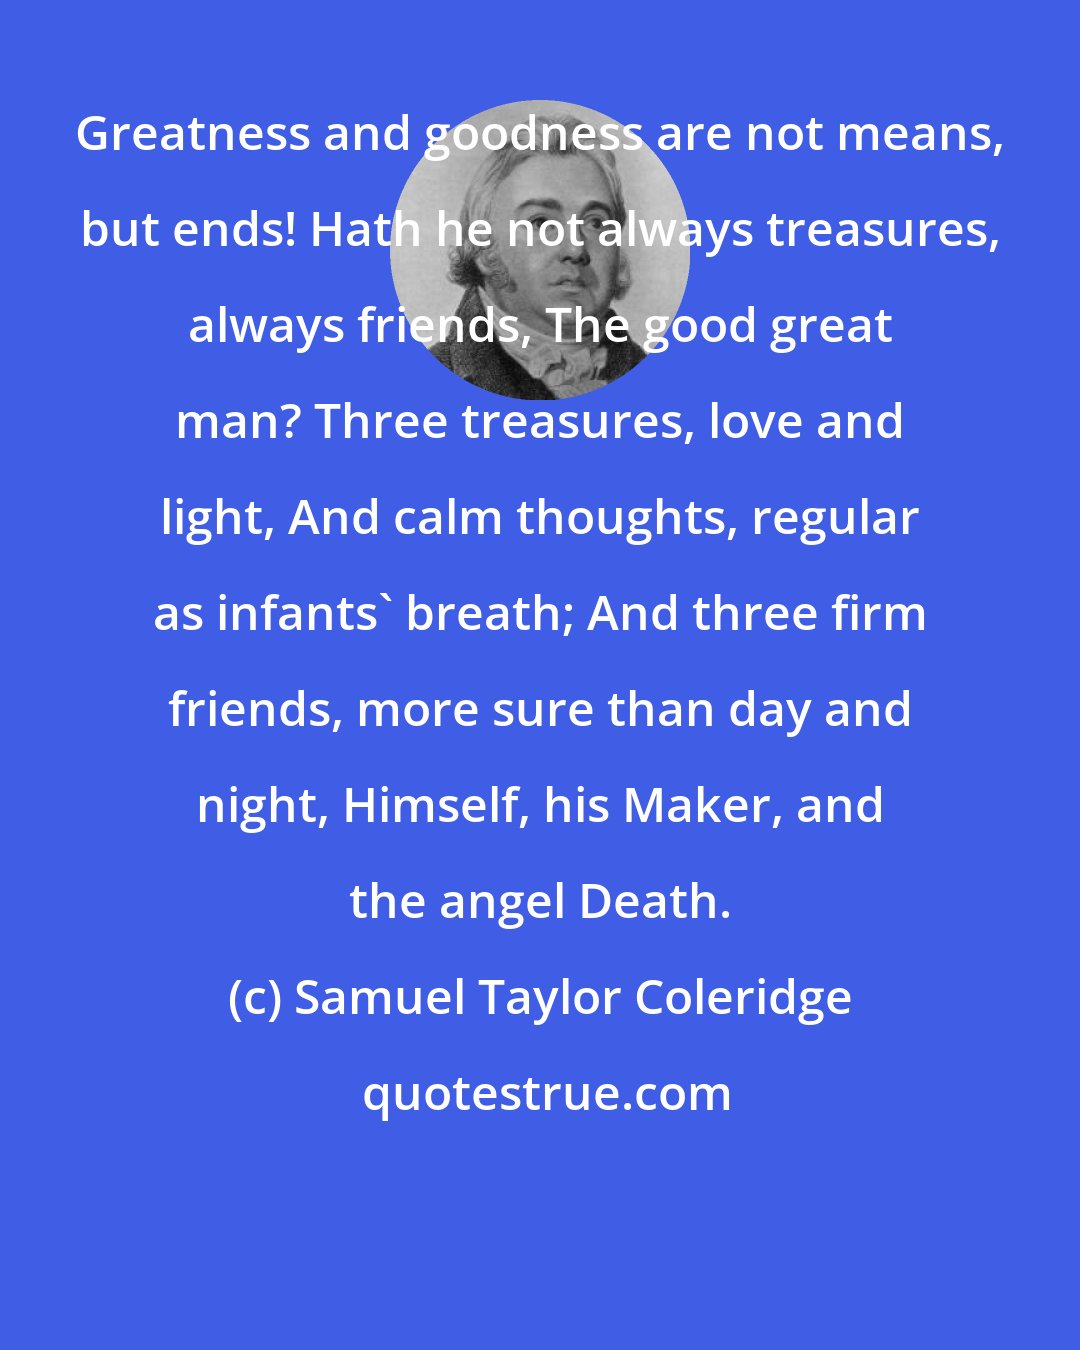 Samuel Taylor Coleridge: Greatness and goodness are not means, but ends! Hath he not always treasures, always friends, The good great man? Three treasures, love and light, And calm thoughts, regular as infants' breath; And three firm friends, more sure than day and night, Himself, his Maker, and the angel Death.